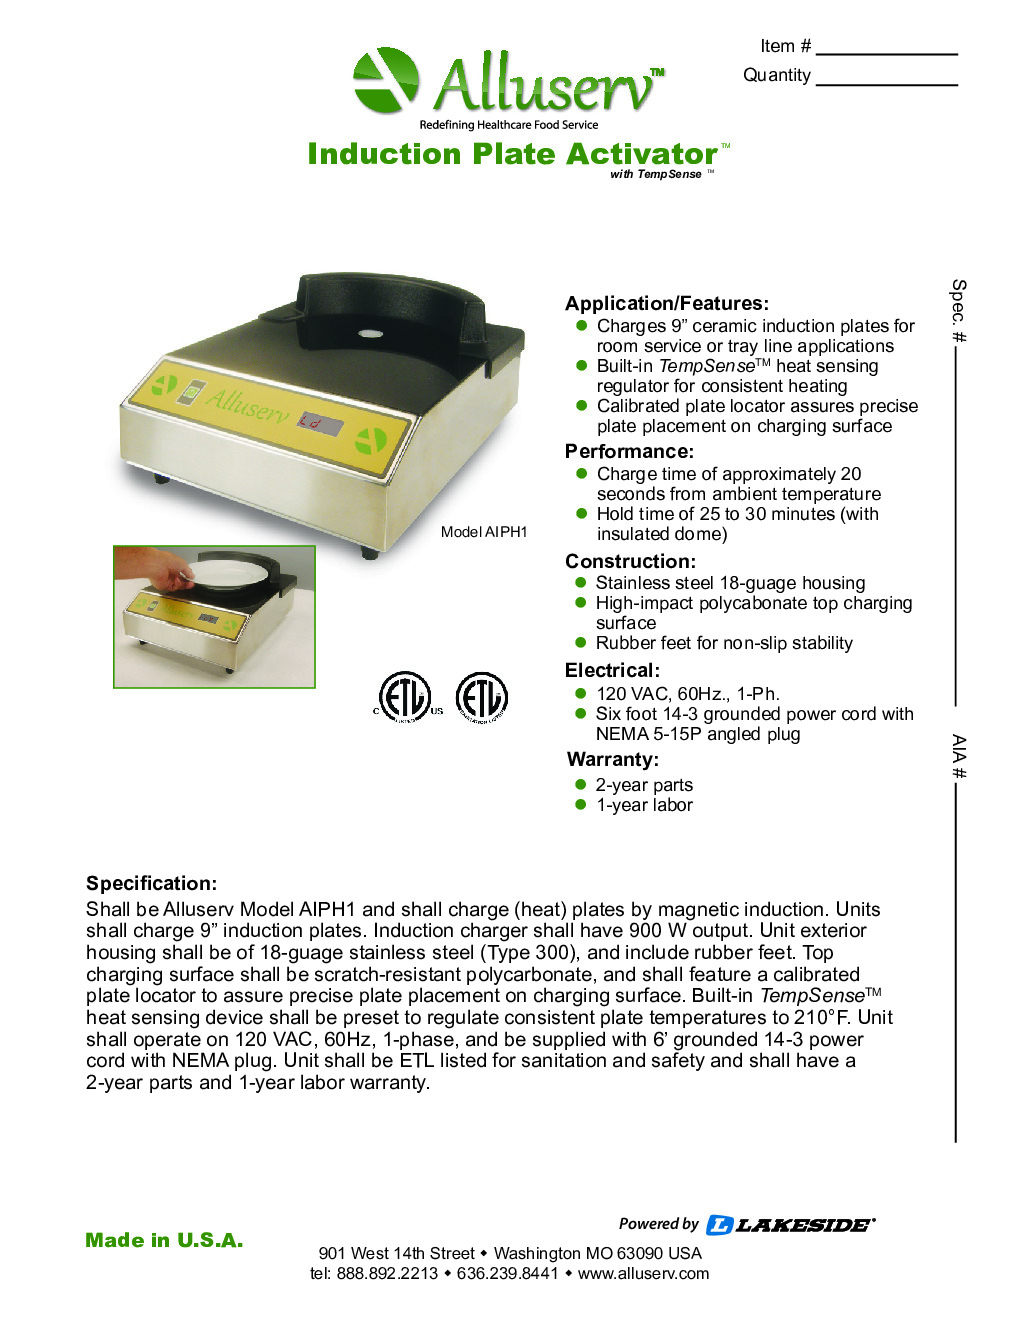 Alluserv AIPH1 for Heated Bases Induction Charger